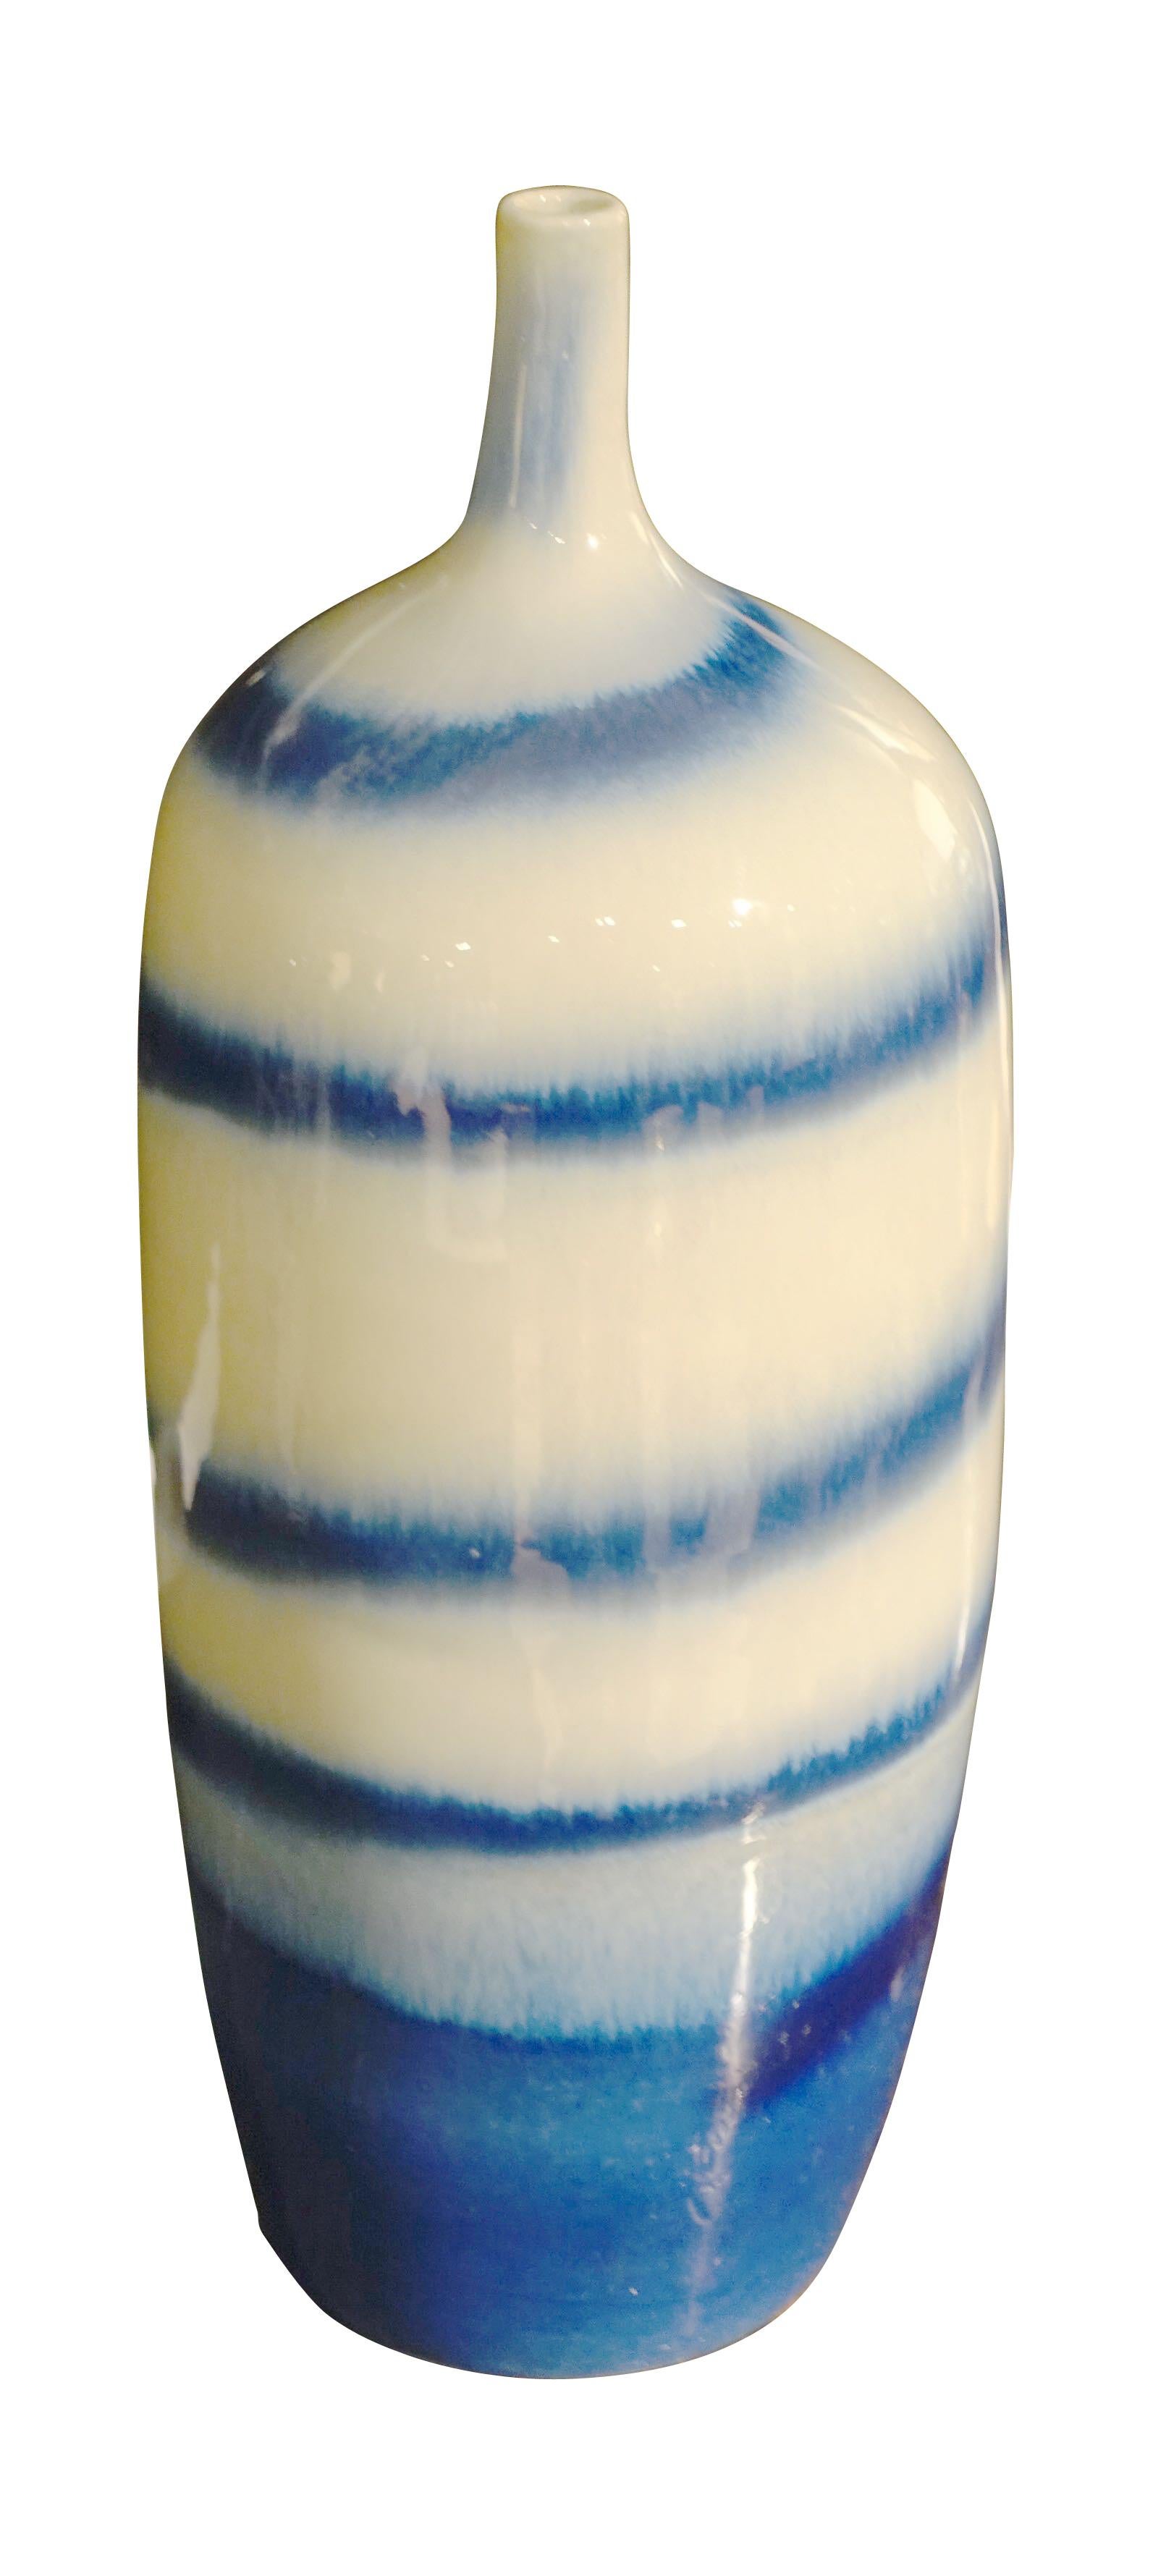 Contemporary Chinese shades of blue and white swirl pattern thin neck vase.
Two are available and sold individually.